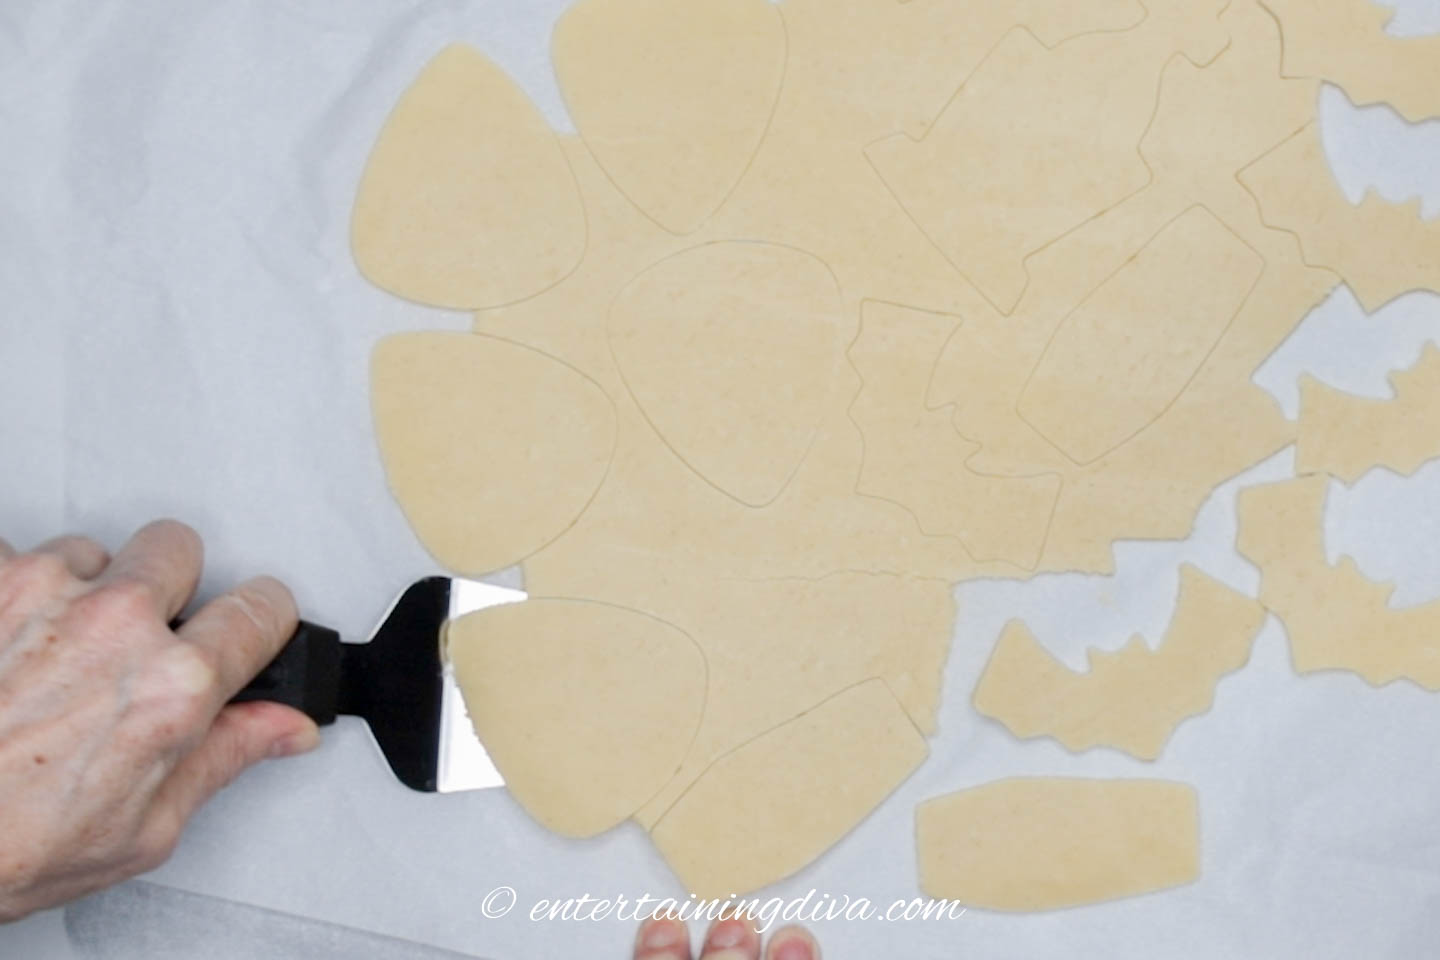 Spatula separating cookies from the parchment paper